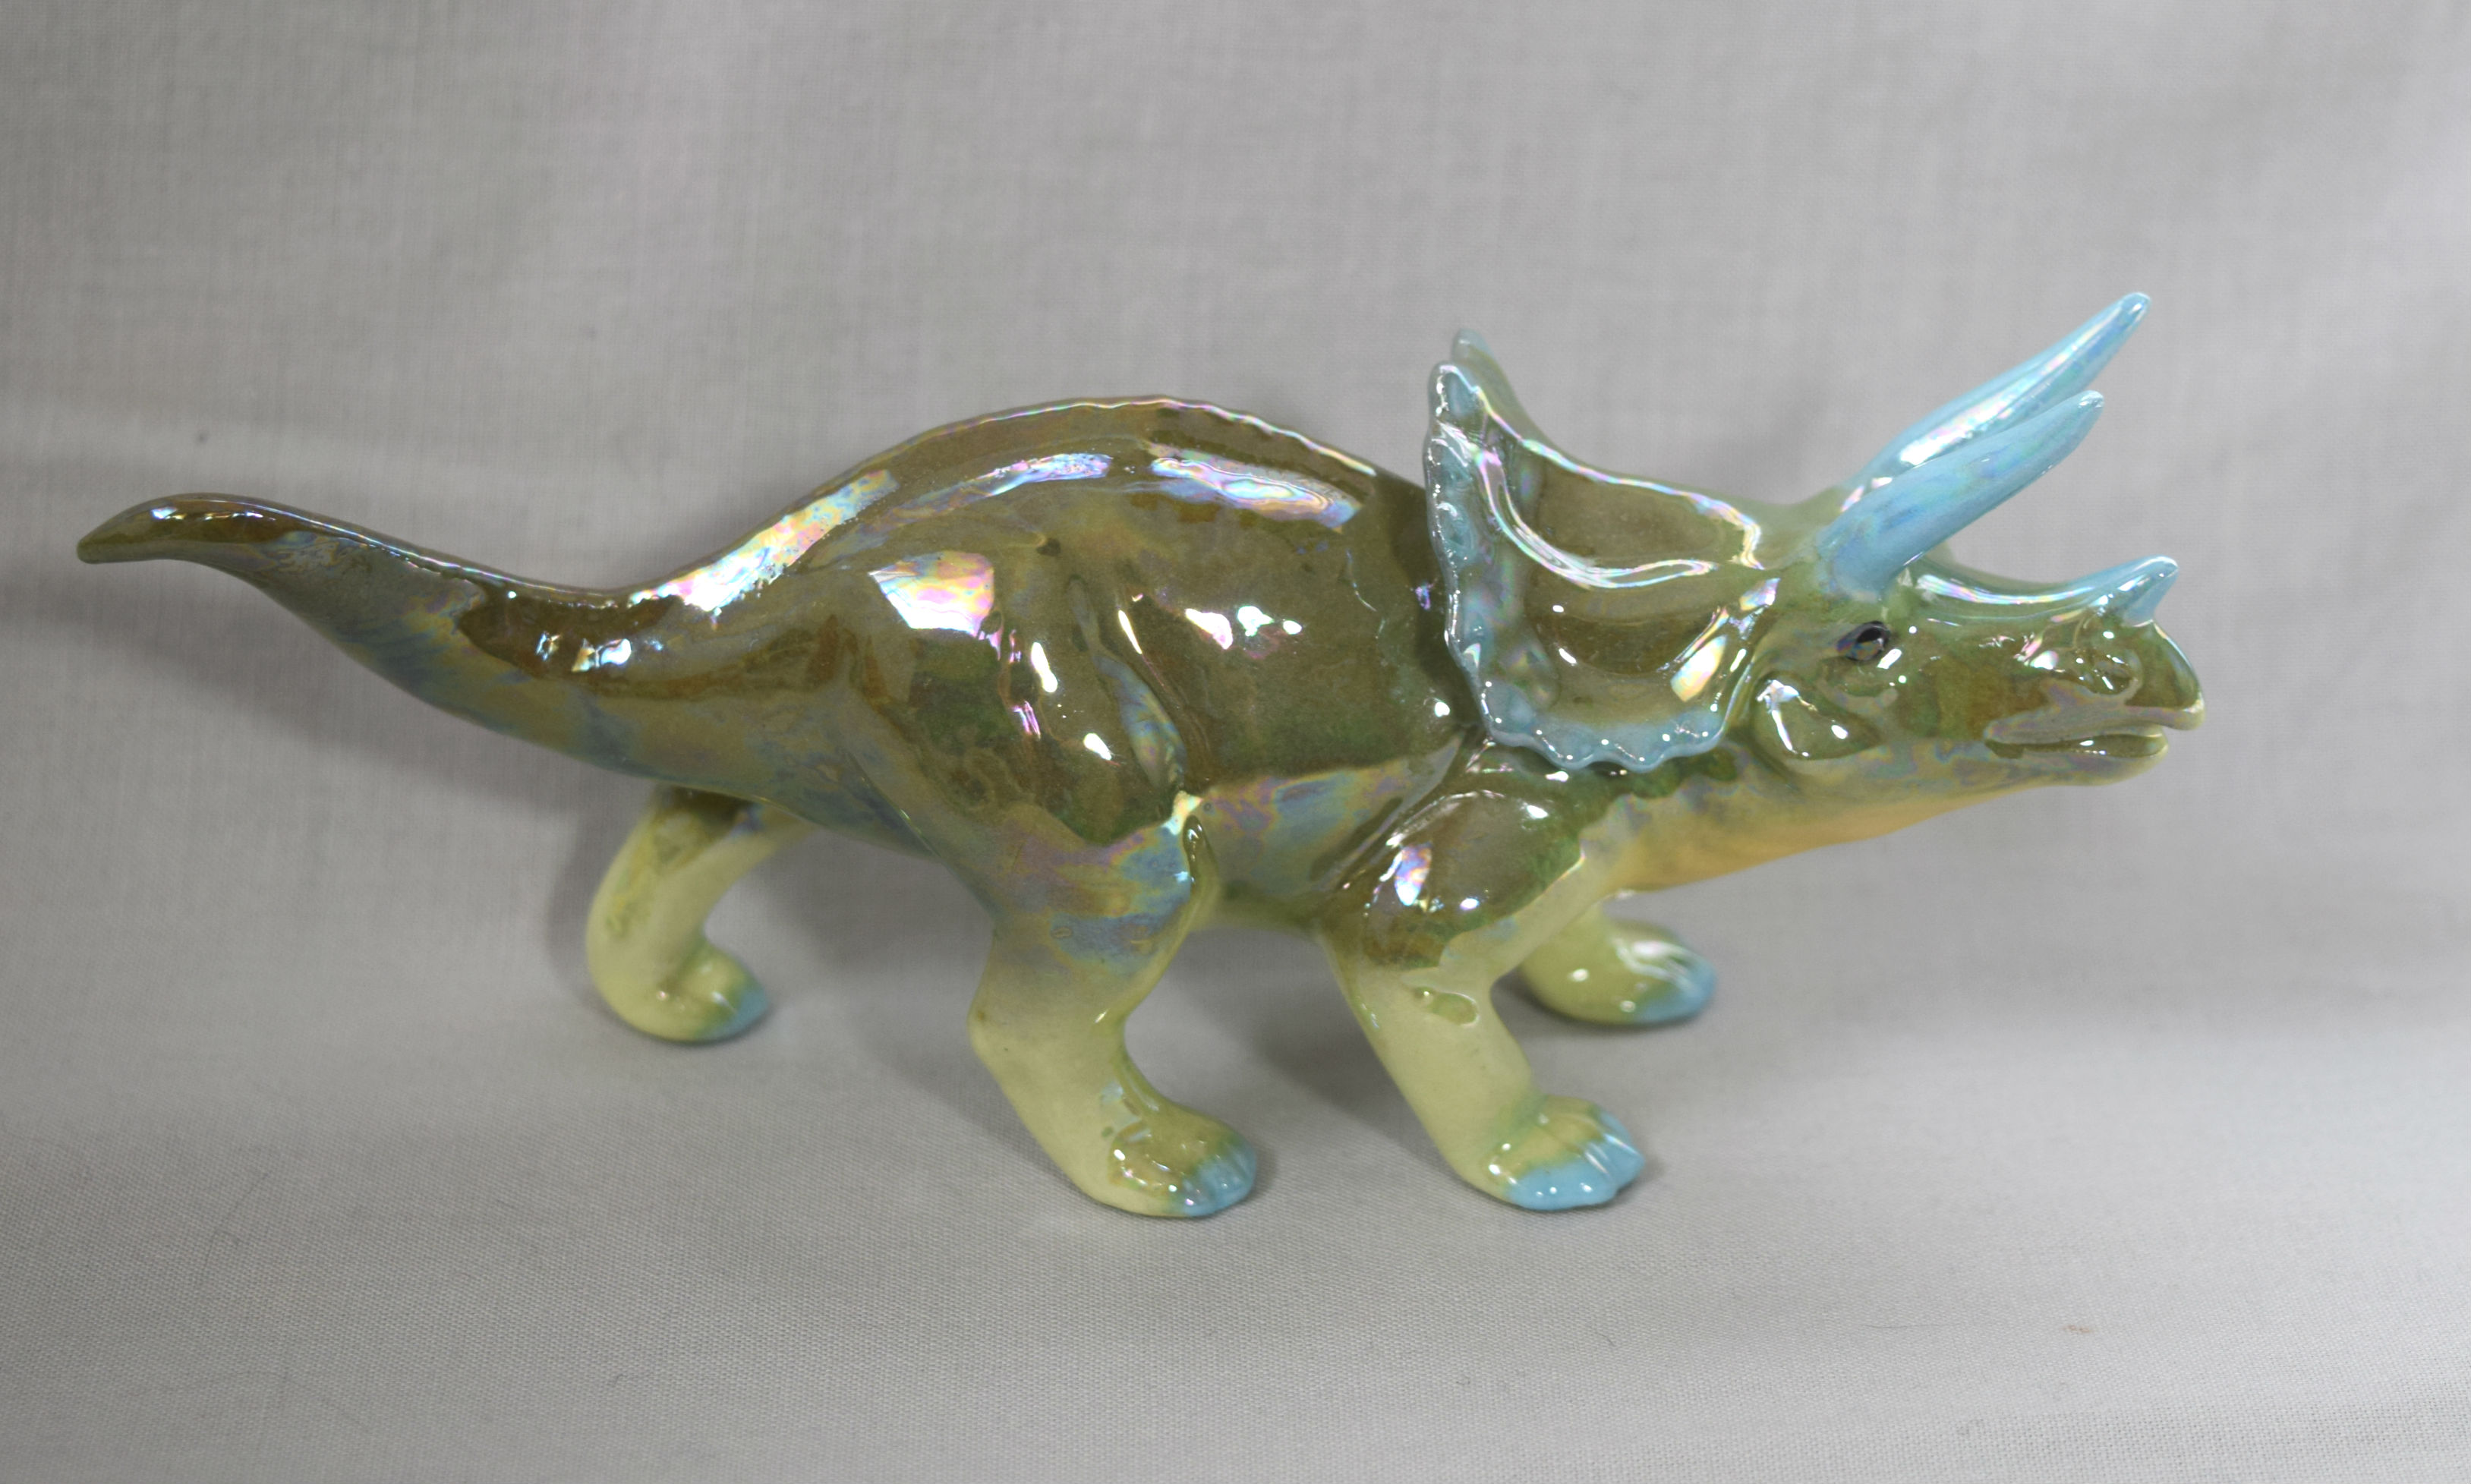 Triceratops adult-image